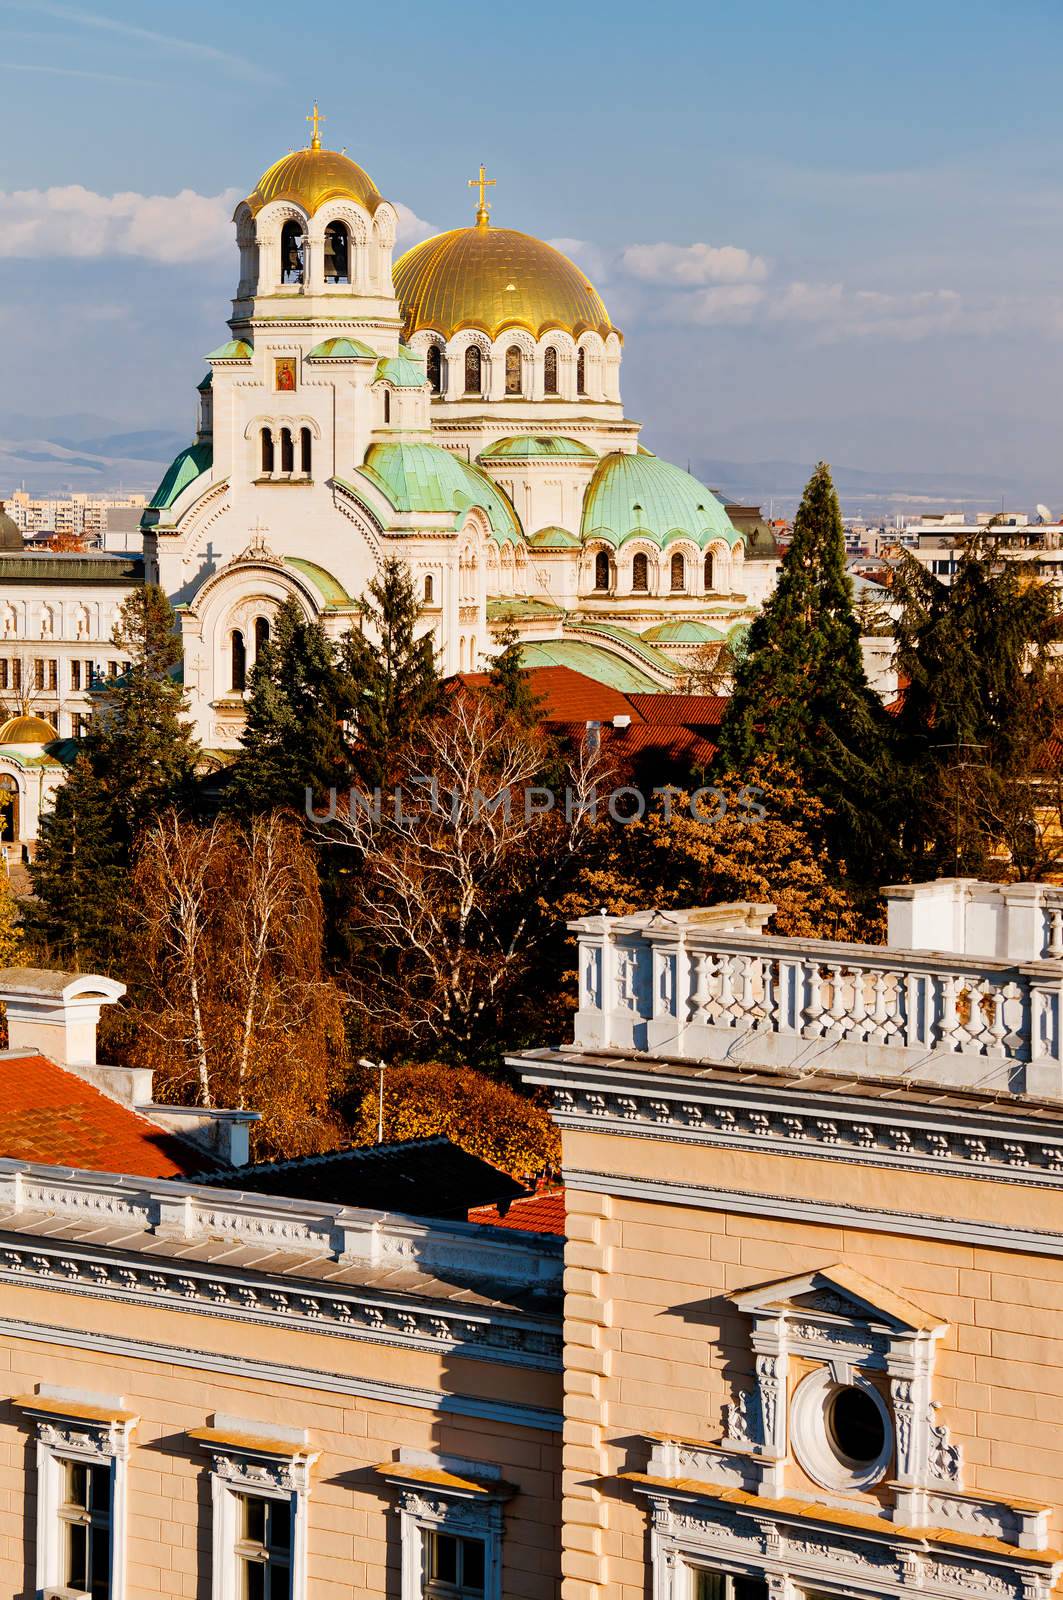 A view of golden domes st. Aleksander Nevski cathedral in Sofia, Bulgaria.